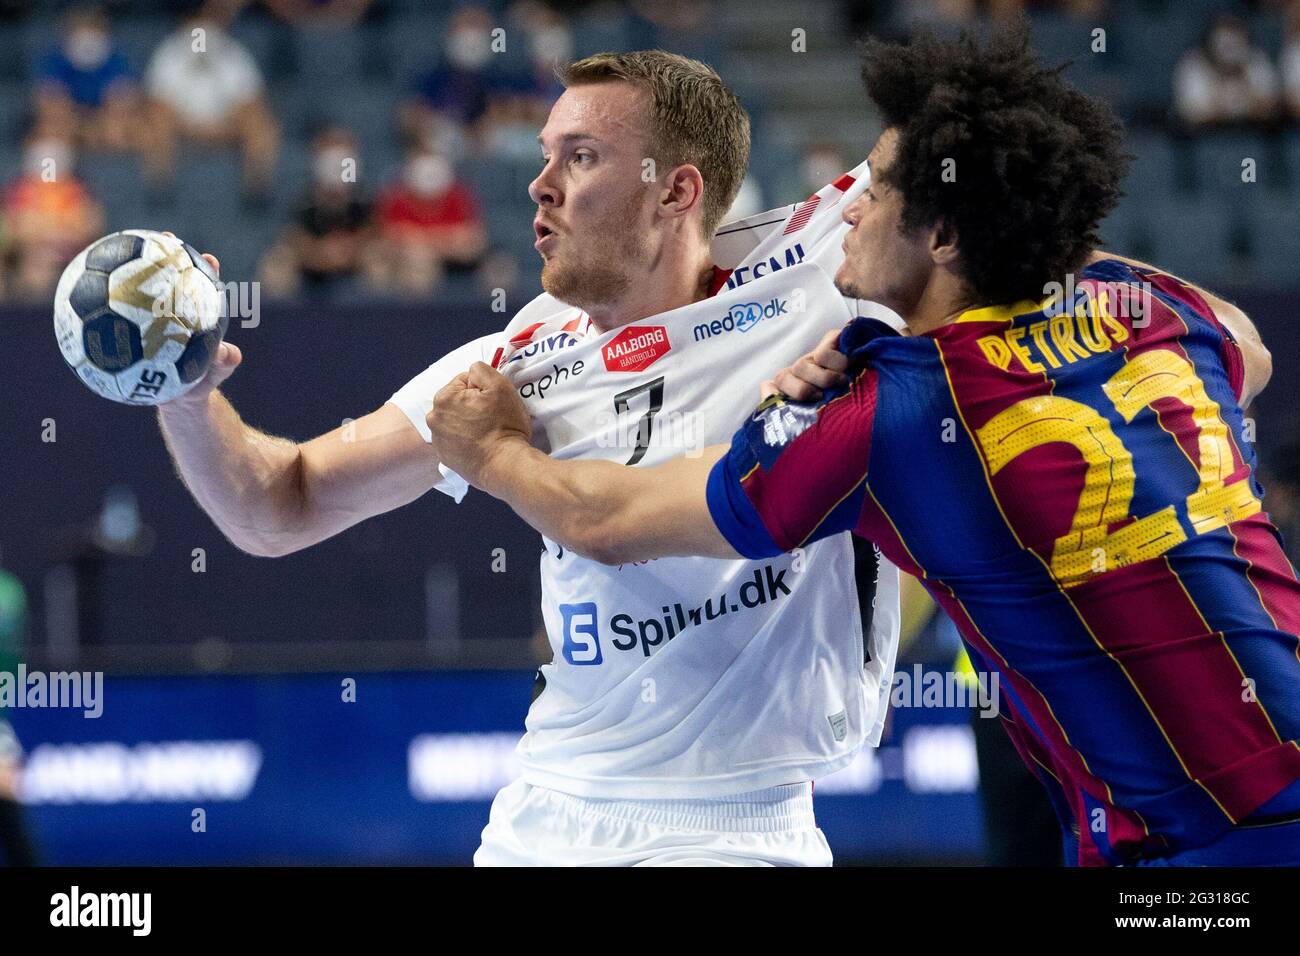 Cologne, Germany. 13th June, 2021. Handball: Champions League, FC Barcelona  - Aalborg HB, Final Round, Final Four, Final in the Lanxess Arena.  Barcelona's Thiagus Petrus (r) and Aalborg's Felix Claar fight for